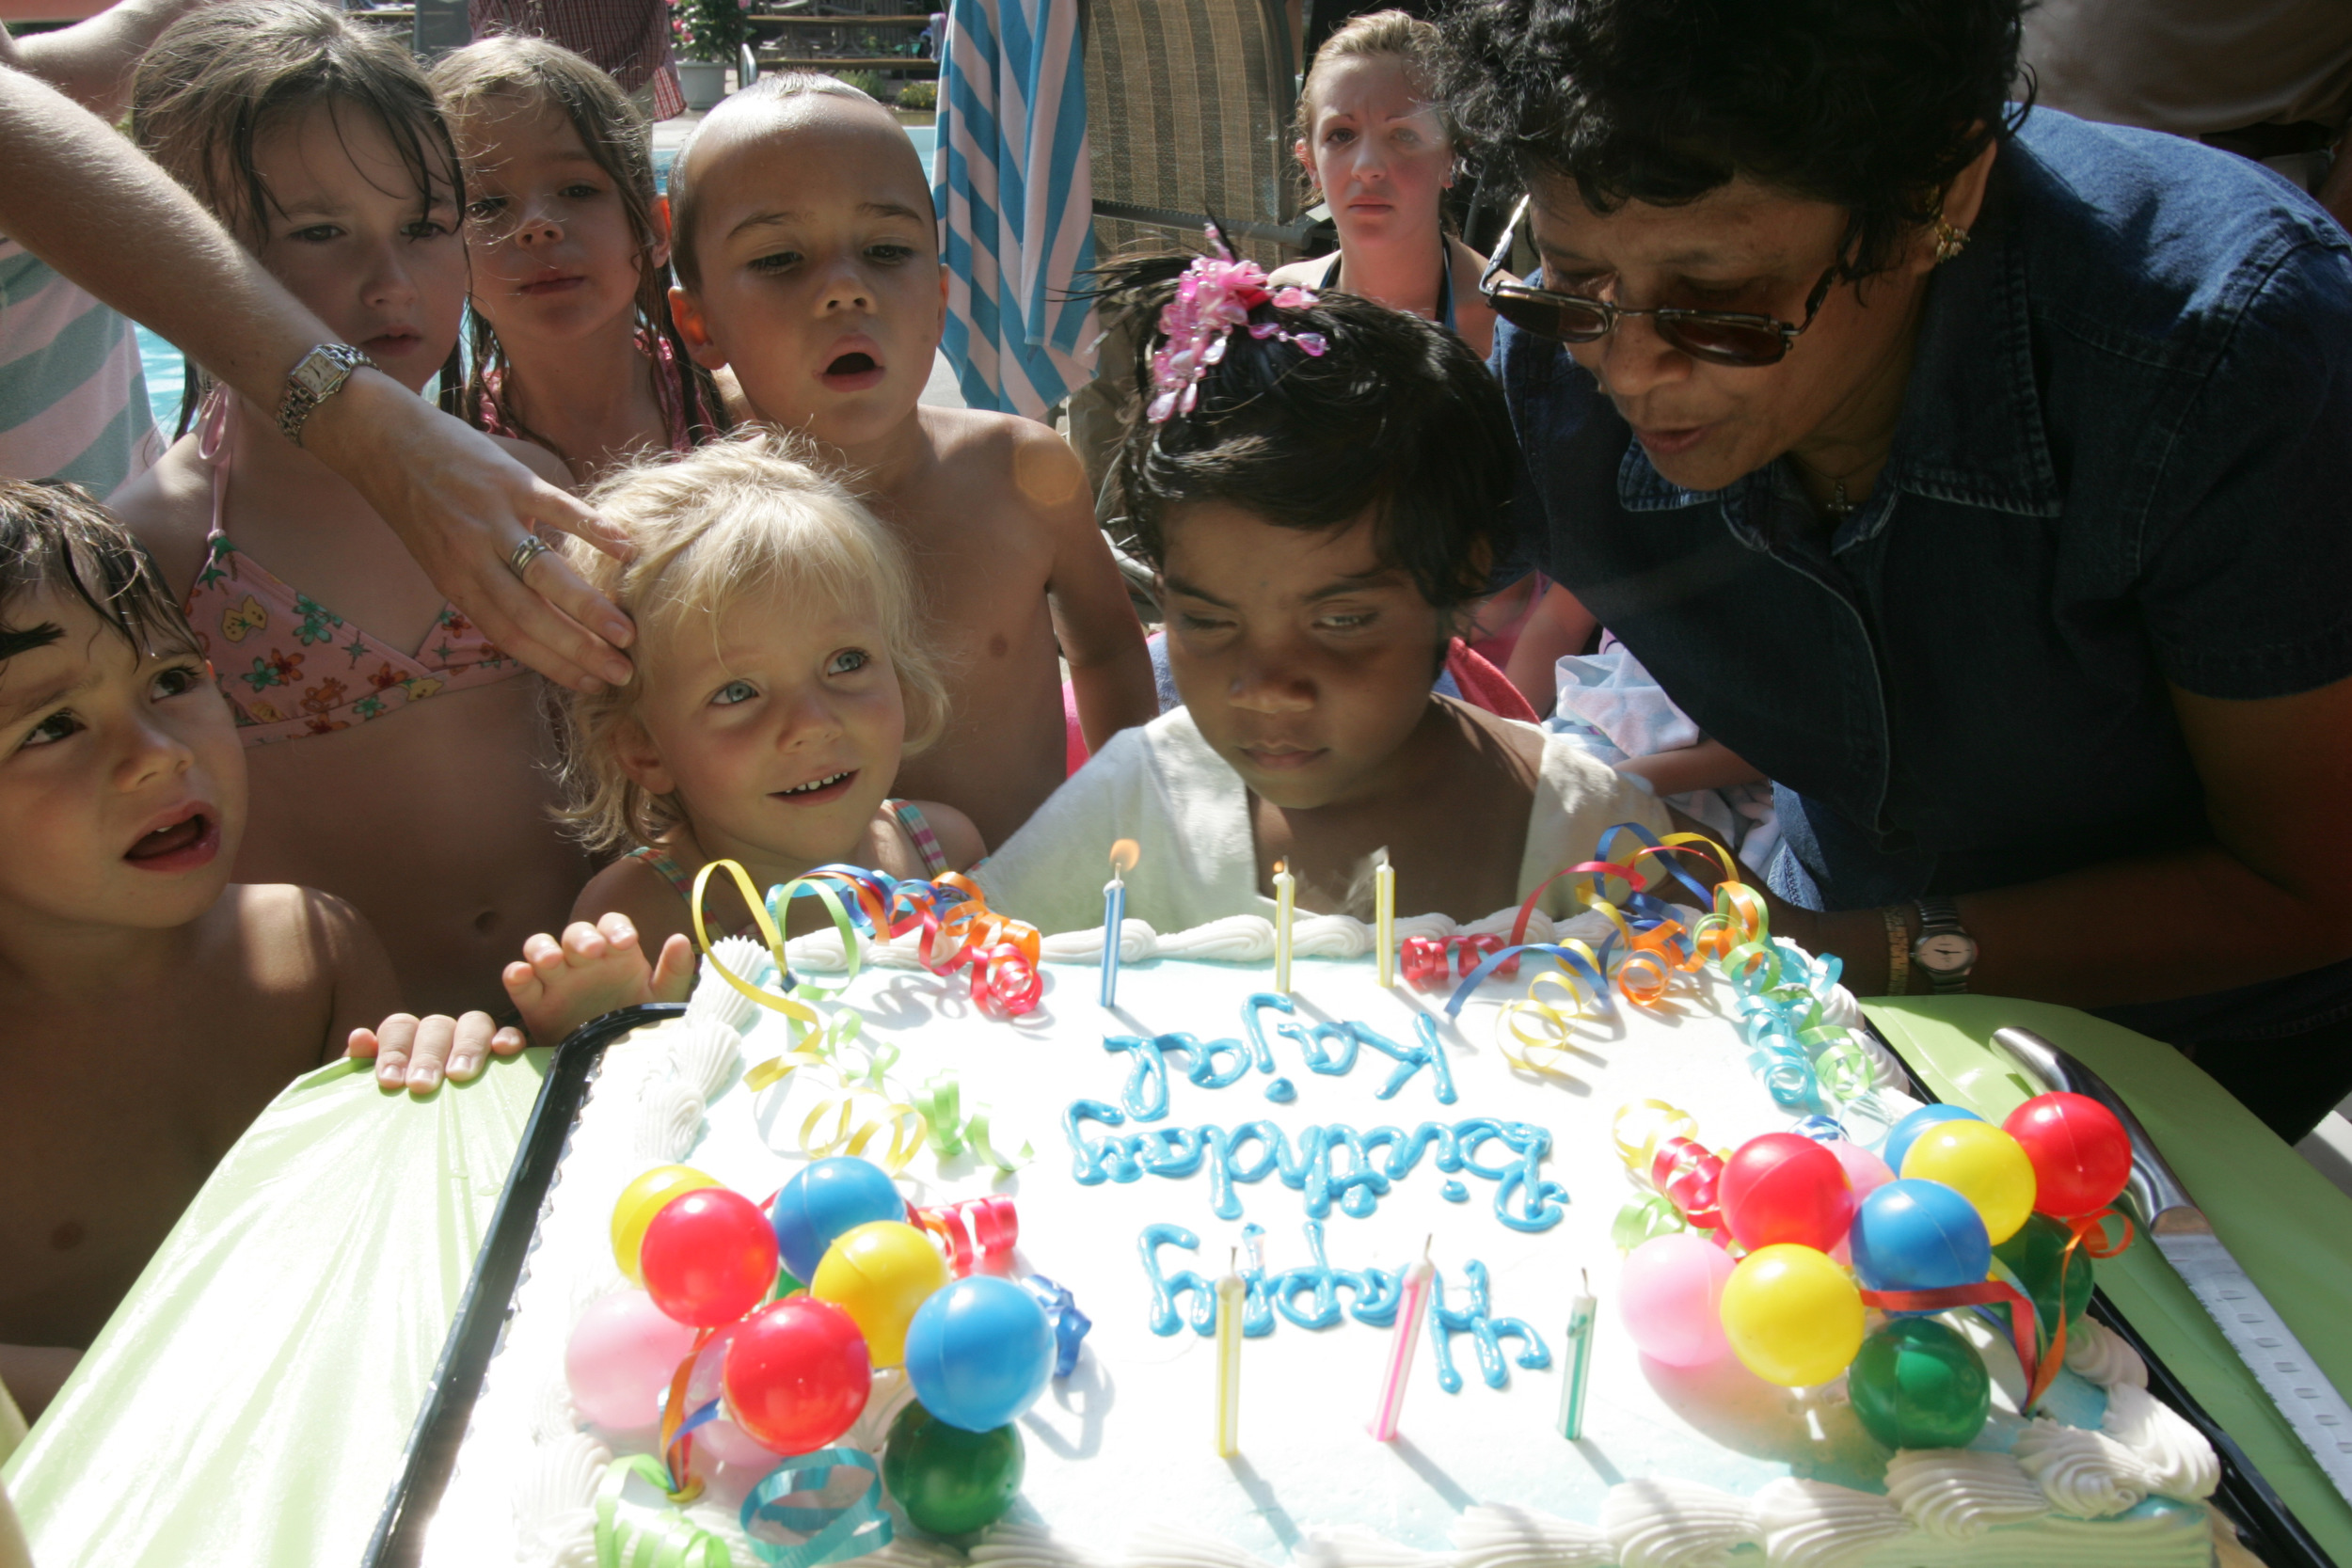  Kajal celebrated her 6th birthday in the U.S. with a pool party. She gets ready to blow out the candles on her cake August 26, 2007 in Nashville, Tennessee. 